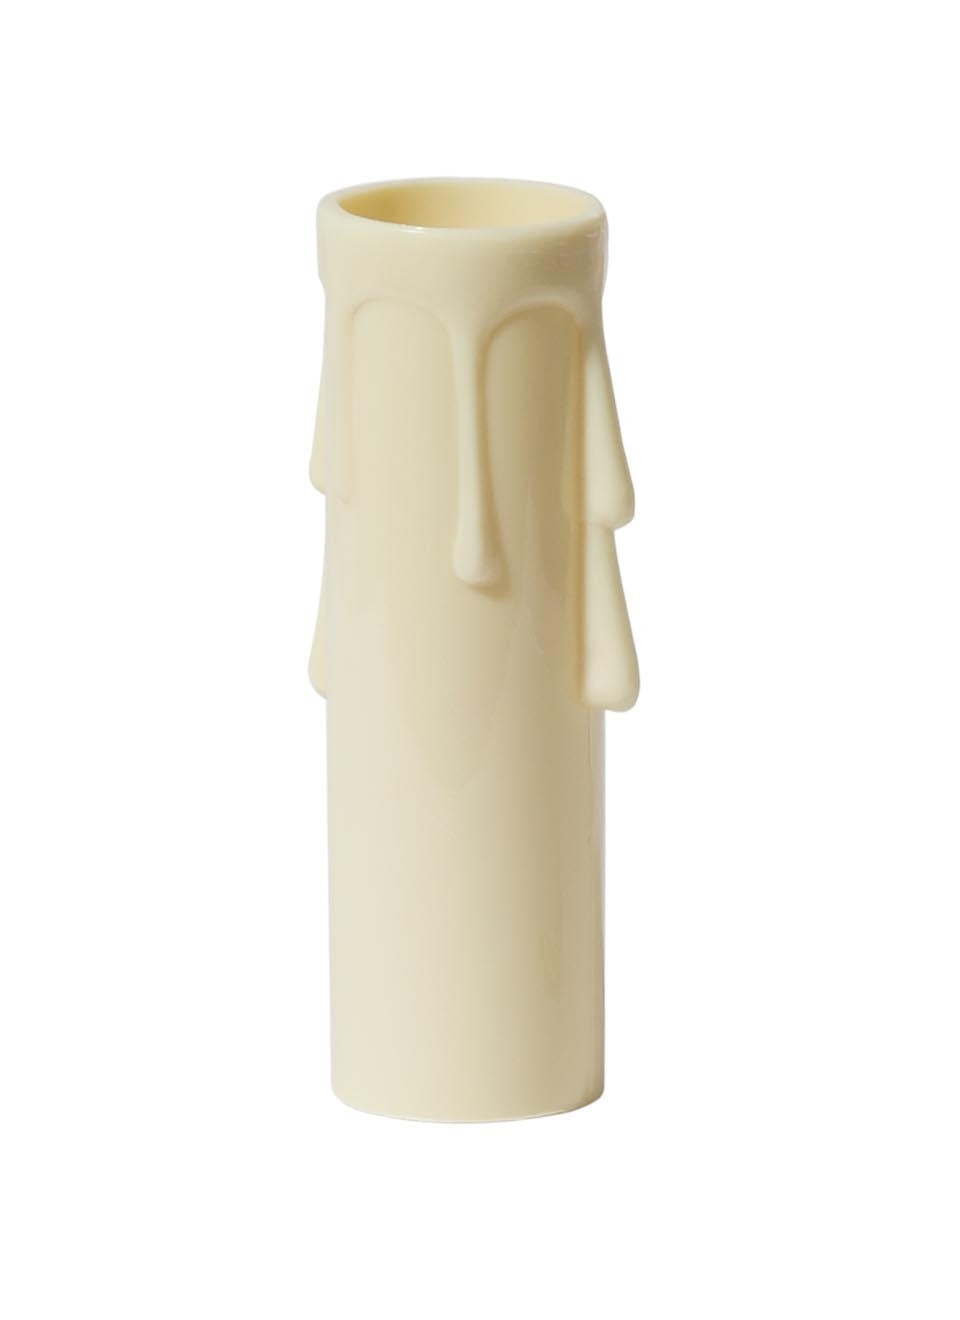 Ivory Color Plastic Candelabra Candle Cover, 3 or 4 Inch Sizes